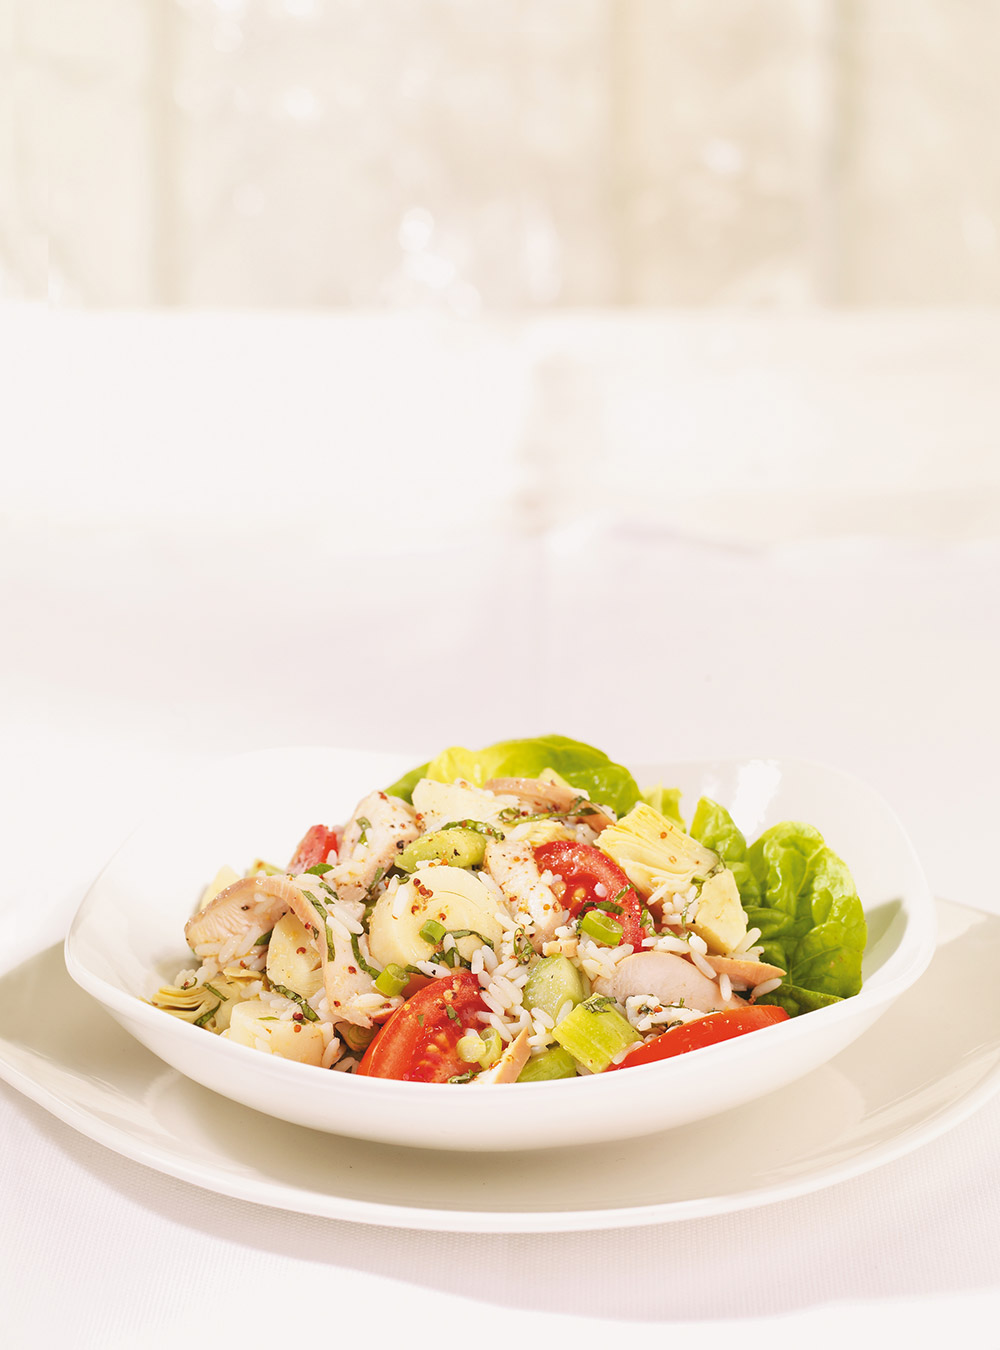 Rice Salad with Artichokes, Hearts of Palm and Chicken